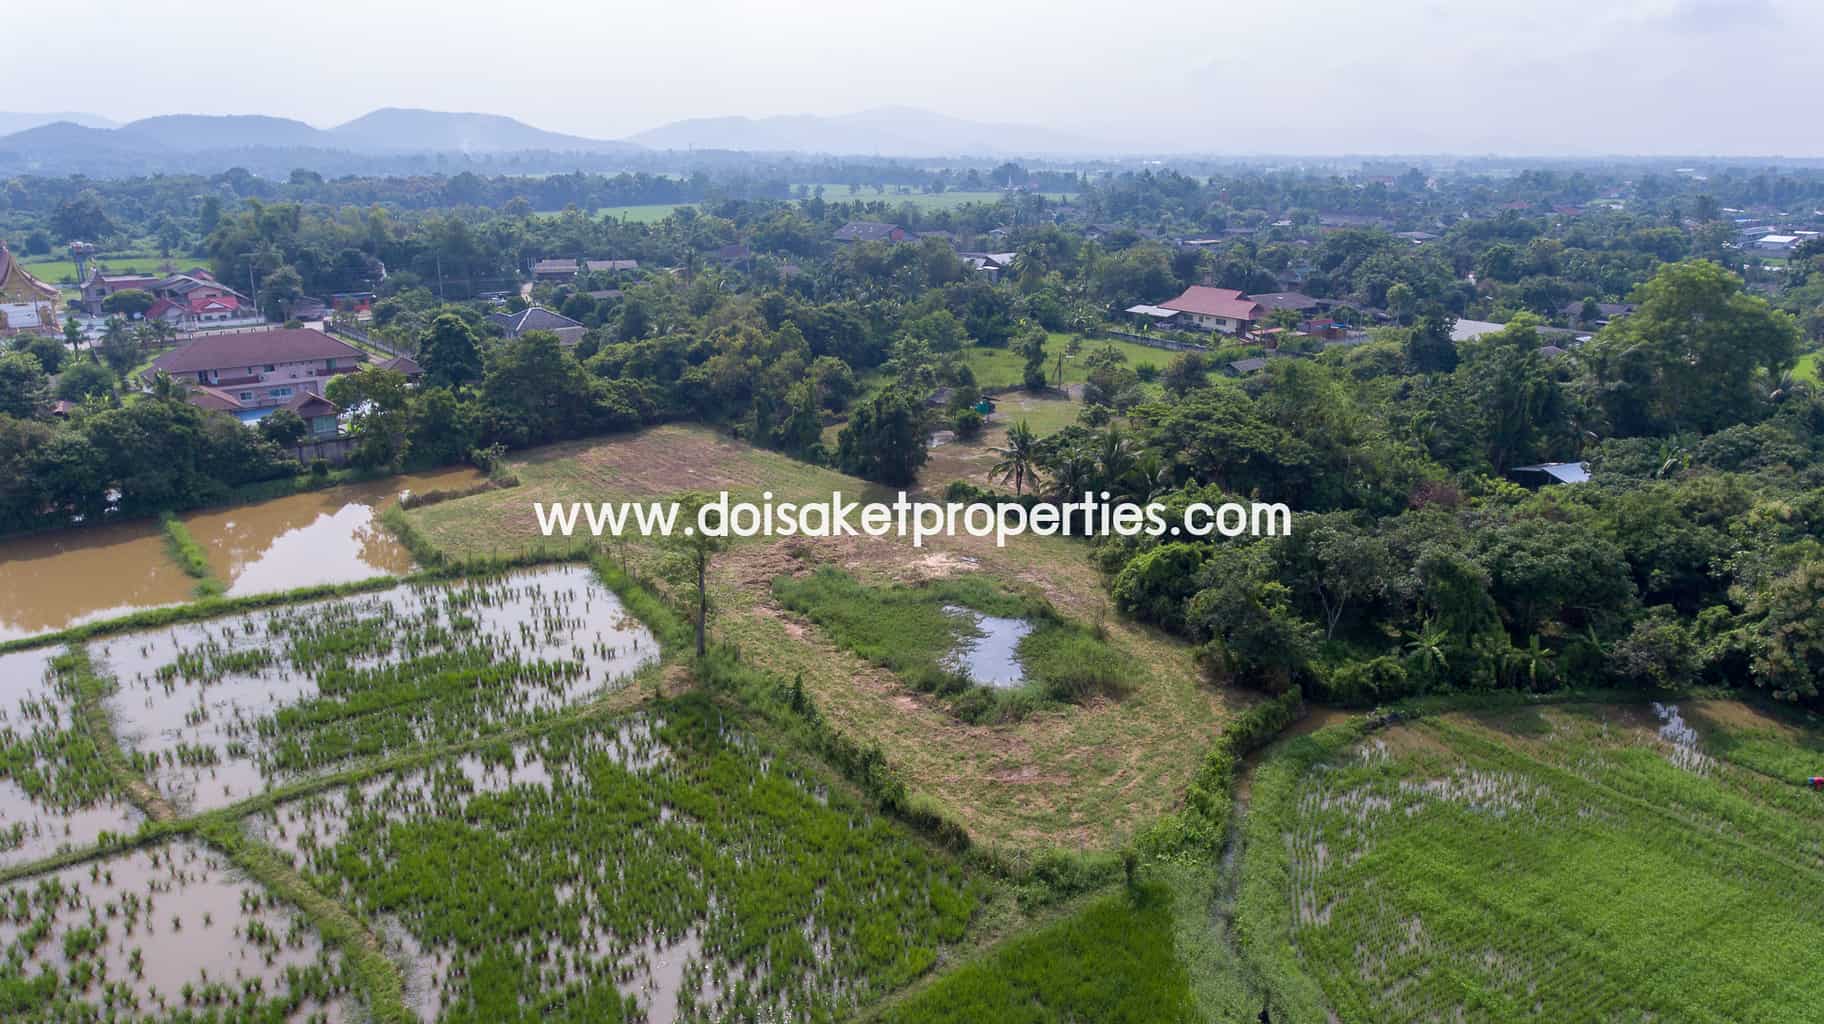 Doi Saket-DSP-(LS324-03) Land with Beautiful Views Close to the Main Road For Sale in Doi Saket